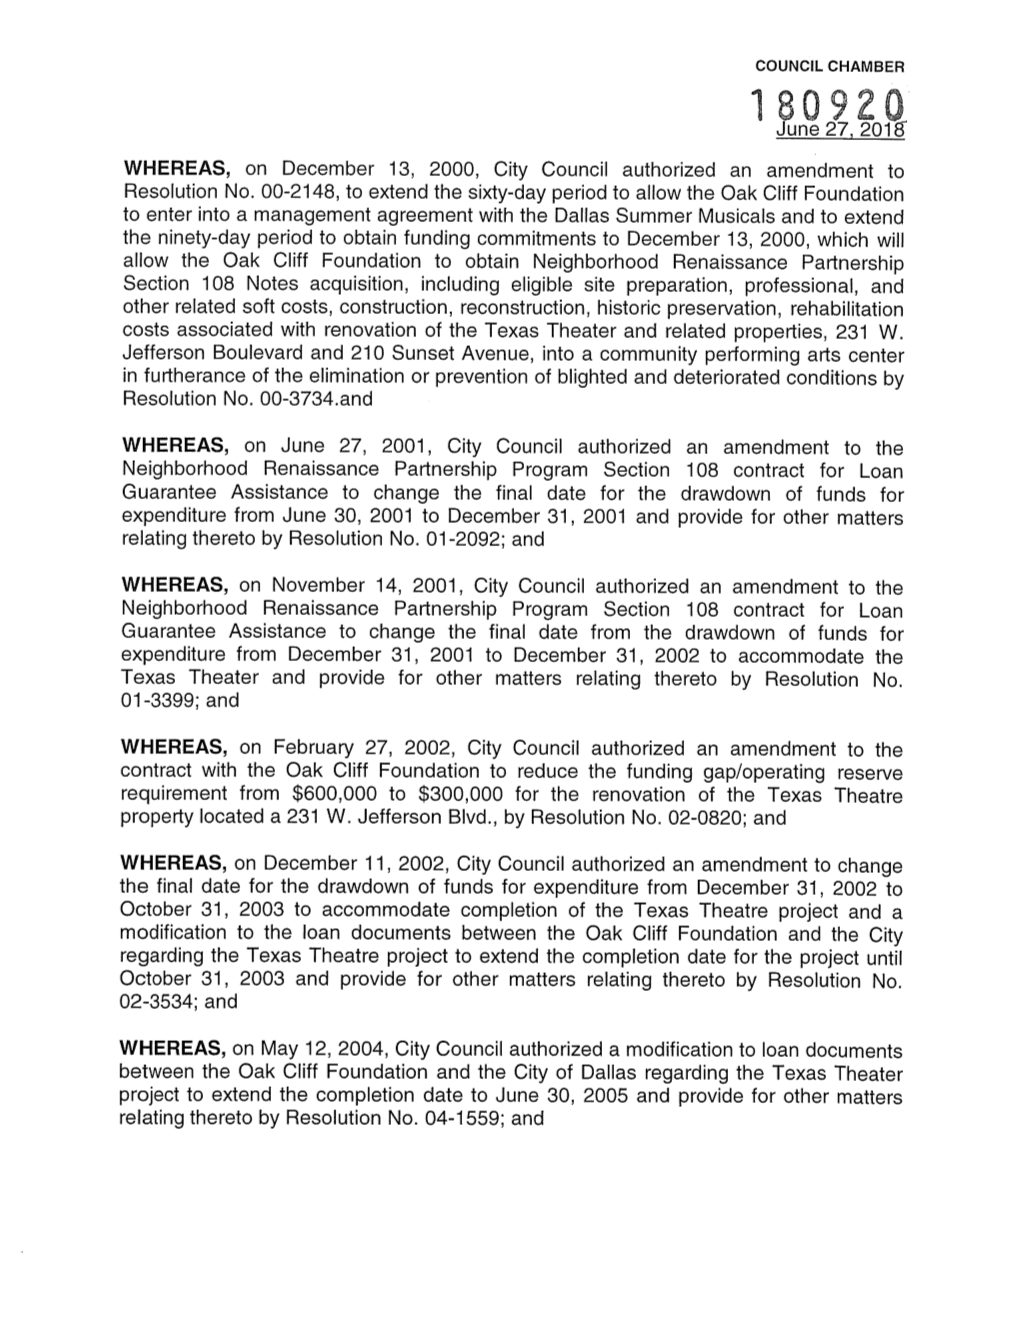 June 27, 2016 WHEREAS, on December 13, 2000, City Council Authorized an Amendment to Resolution No. 00-2148, to Extend the Sixty